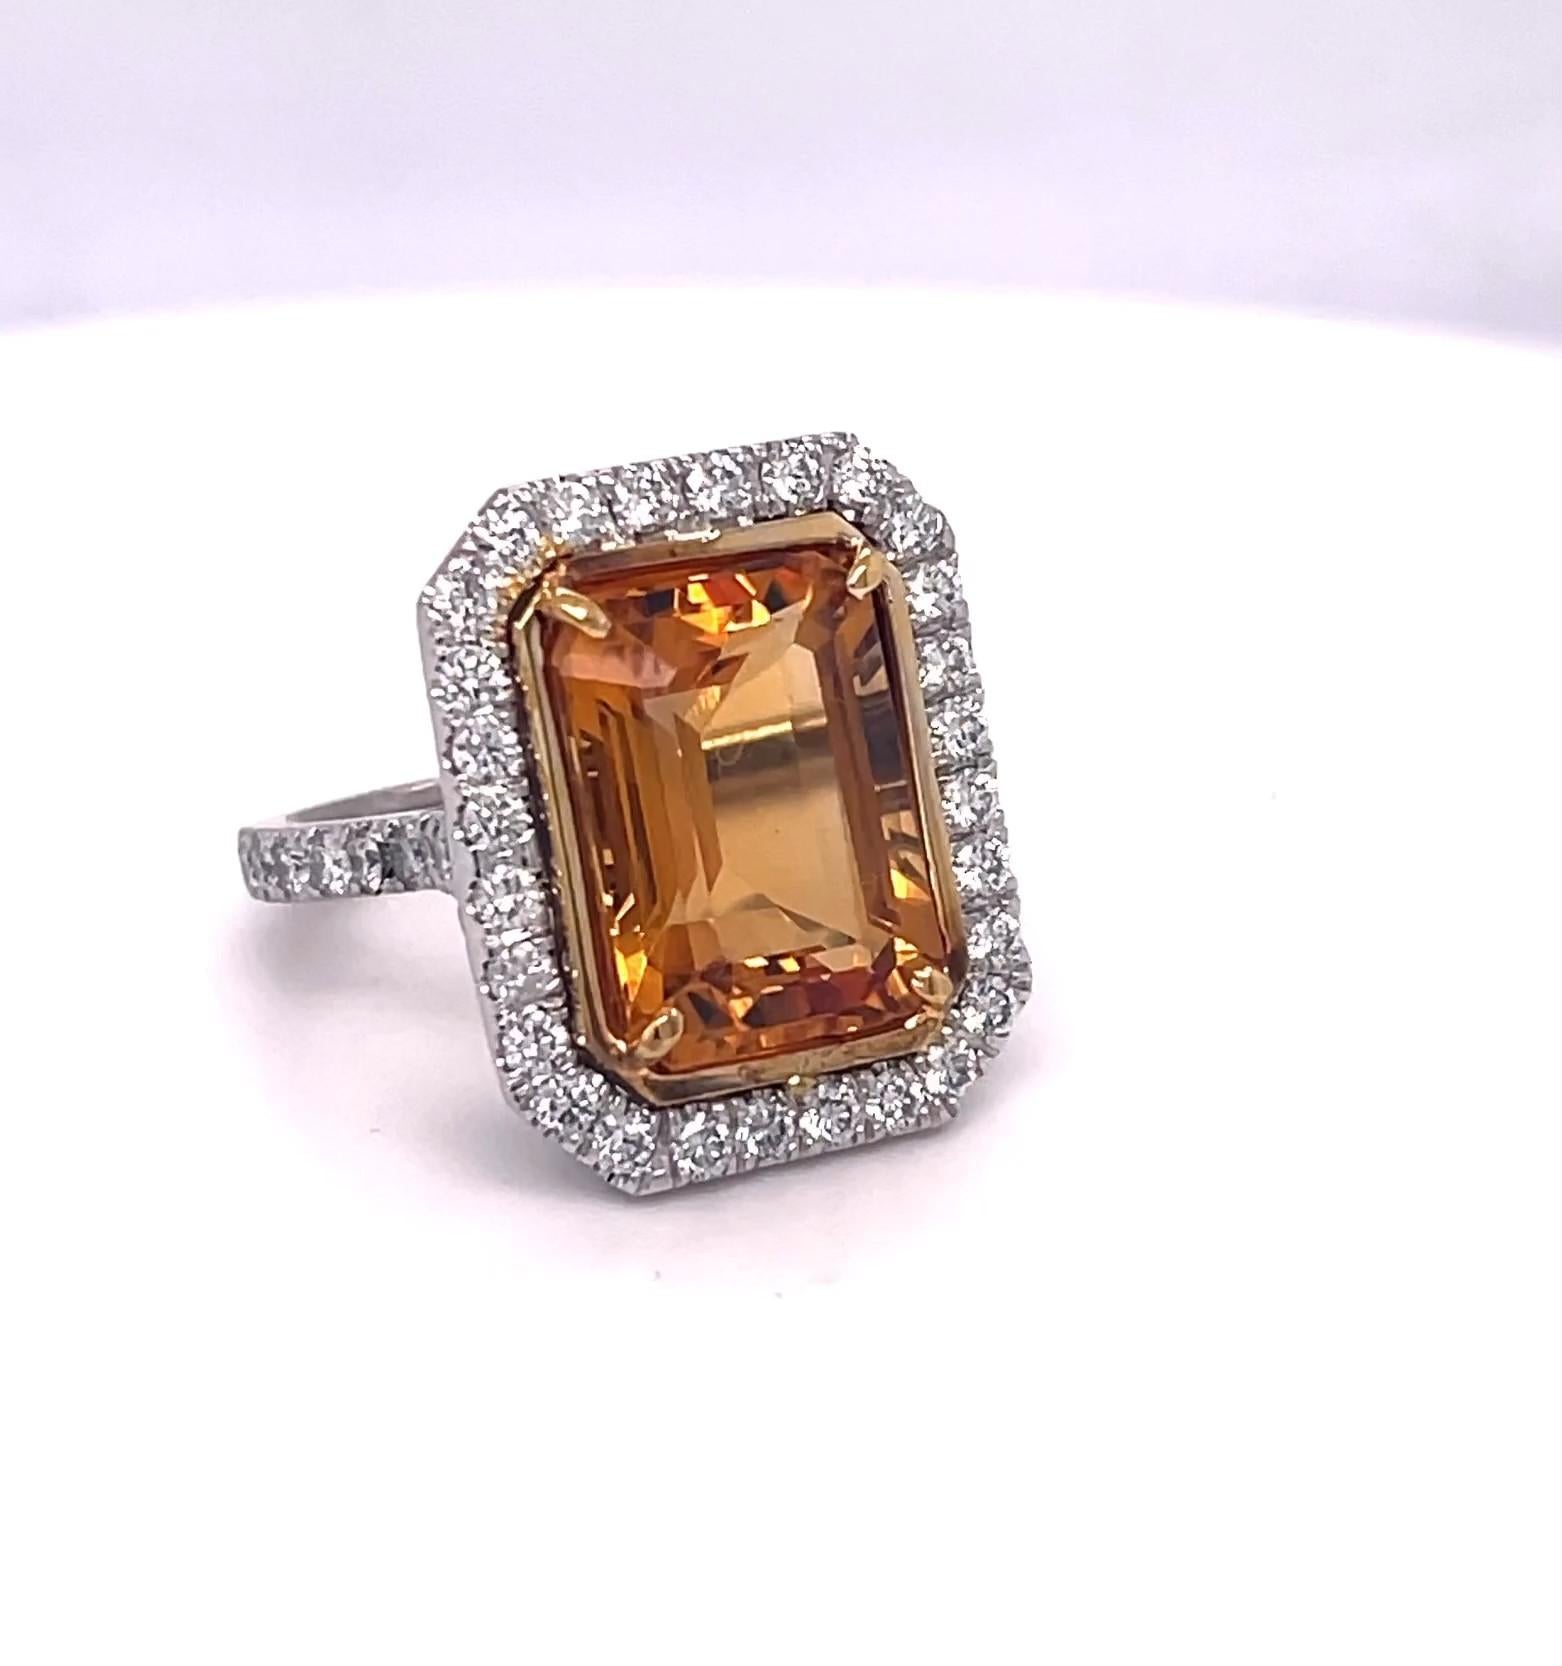 Emerald Cut Citrine and Diamond 7.71 Carats Ring, Platinum / 18KYG In New Condition For Sale In Beverly Hills, CA